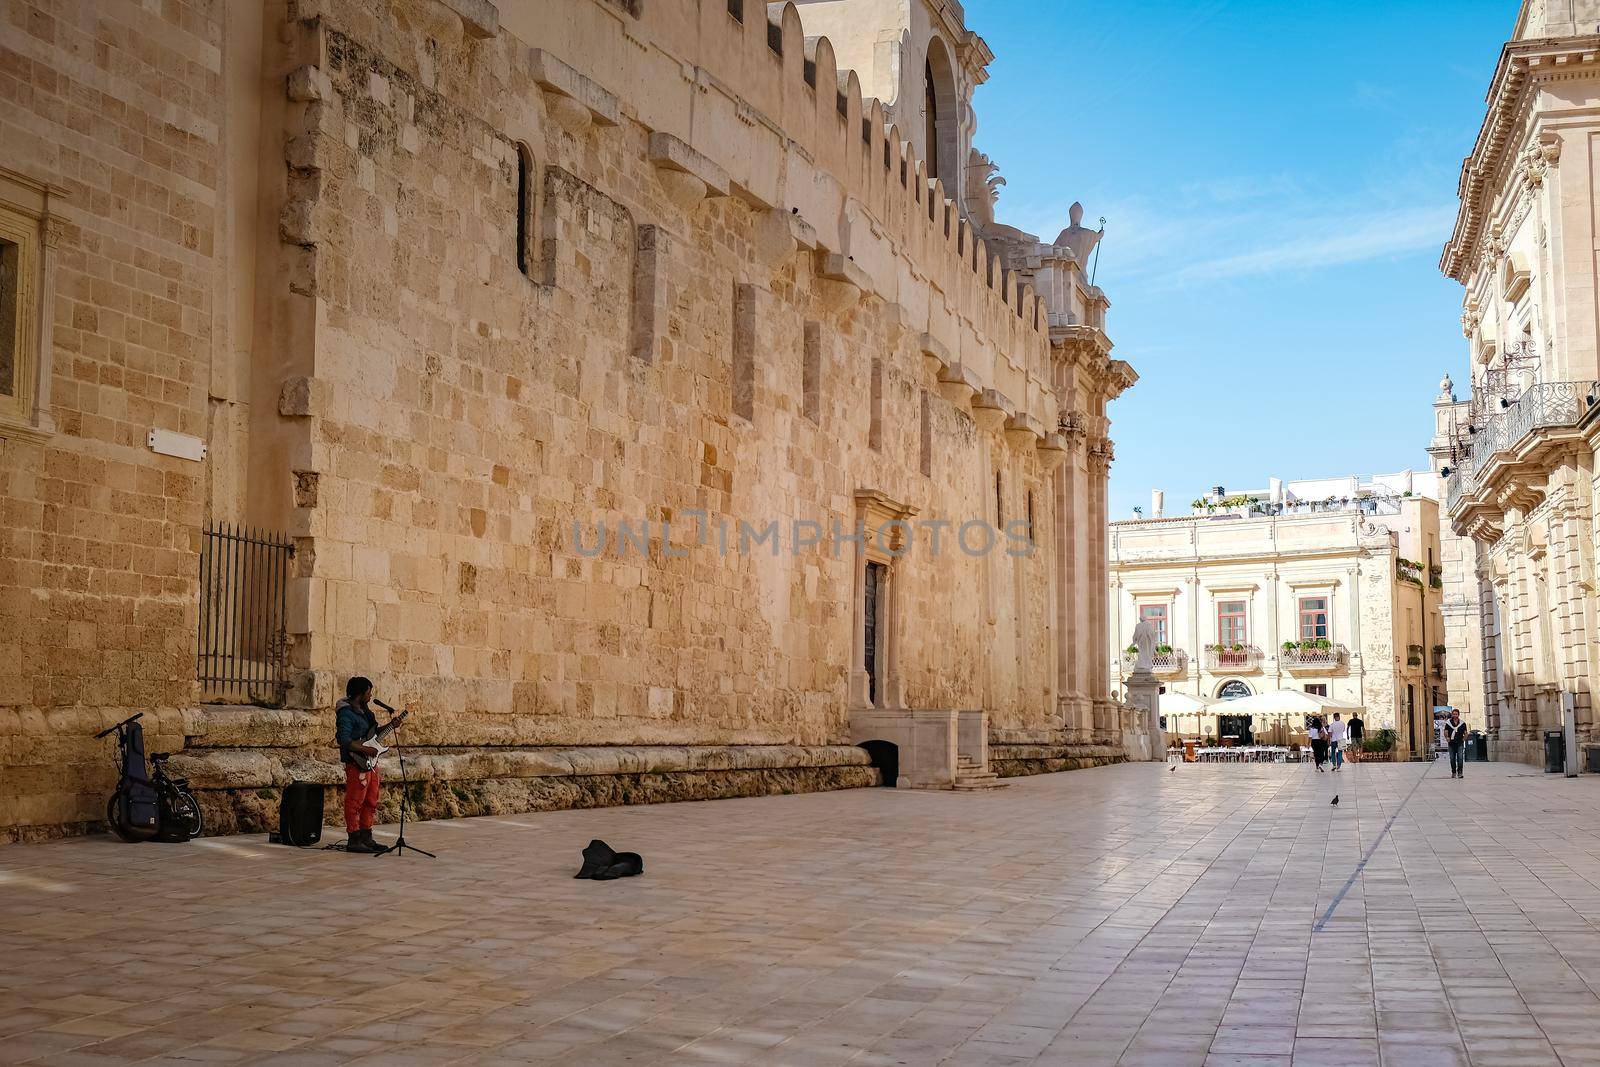 Ortigia in Syracuse Sicily Italy October 2020 in the Morning. Travel Photography from Syracuse, Italy on the island of Sicily. Cathedral Plaza and market with people wearing face protection during the 2020 pandemic covid 19 corona virus